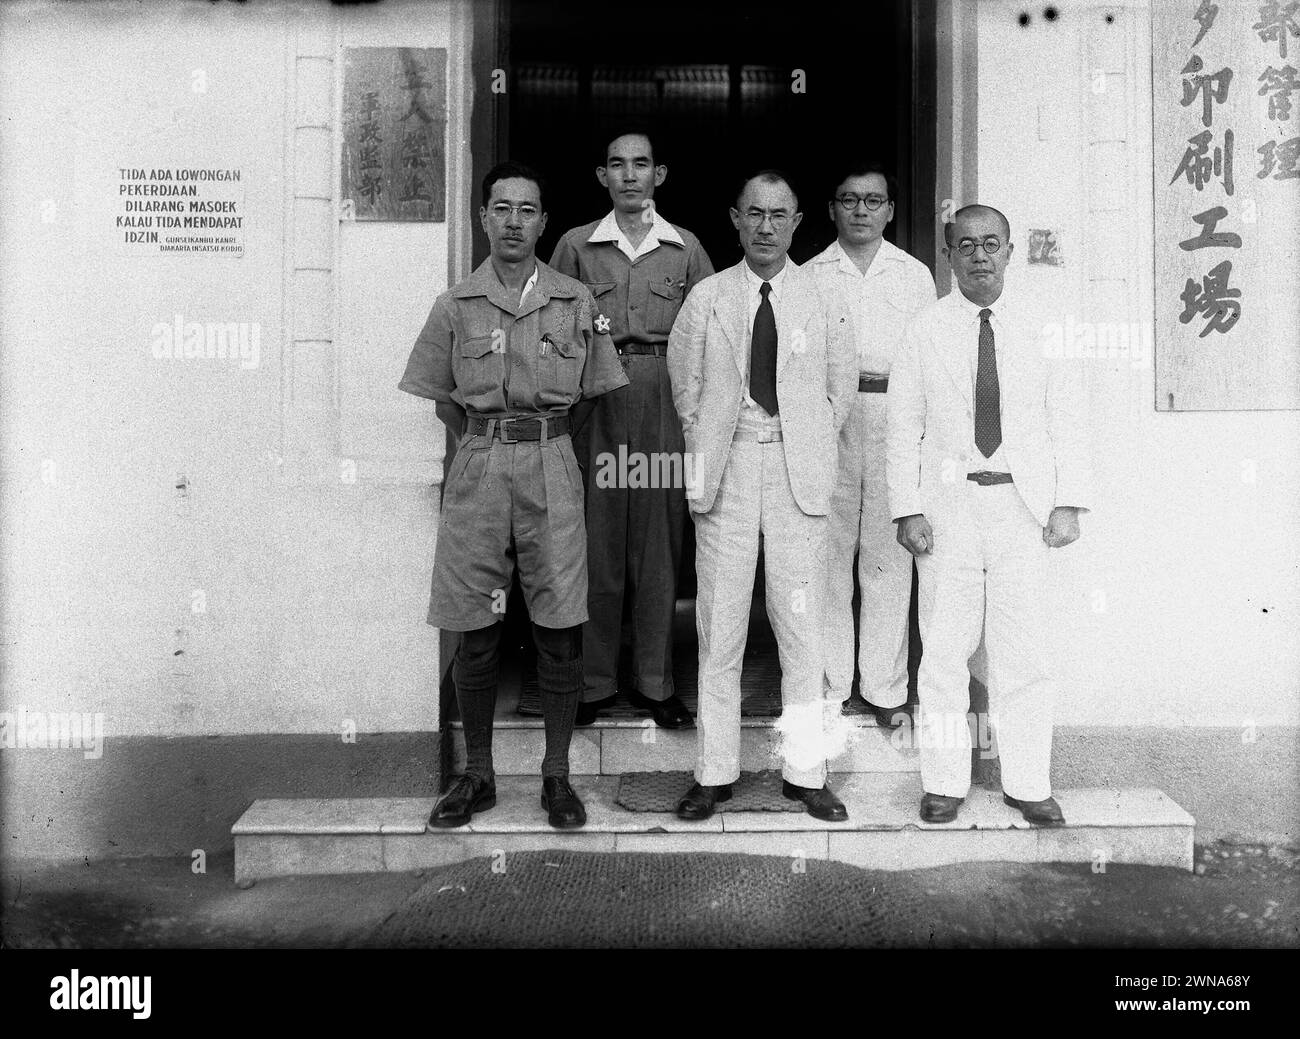 Two Japanese Officers and Three Japanese Civilians in front of an office building in Indonesia (Tidak Ada Lowongan Pekerdjaan) 1942-1945 Stock Photo